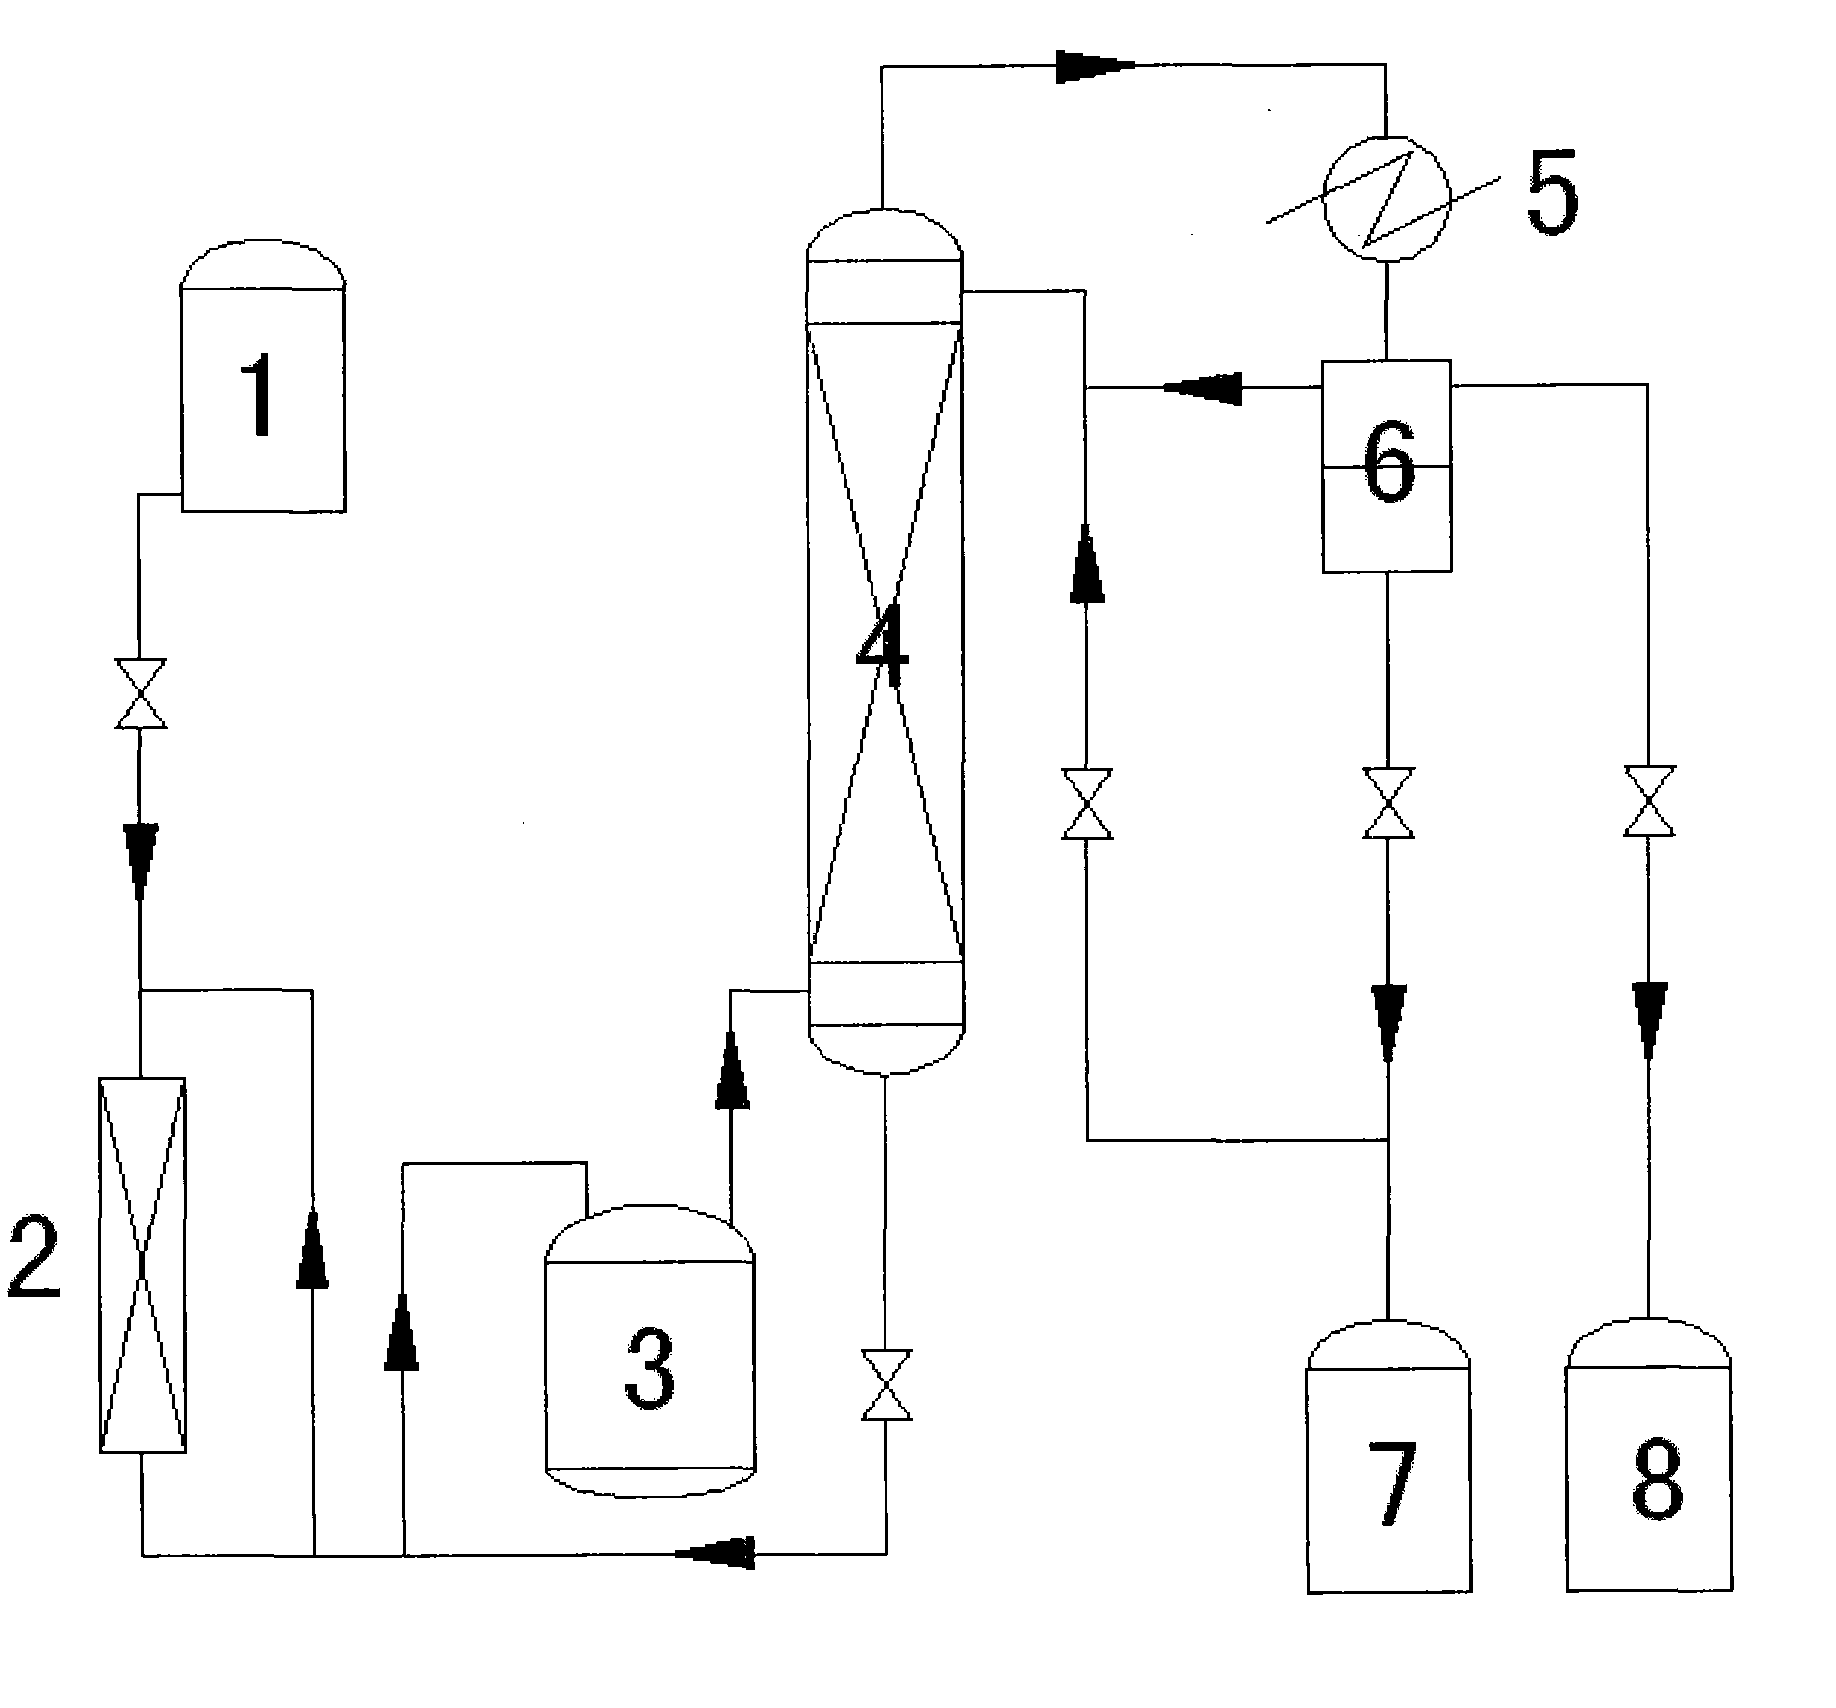 Method for preparing propylene glycol monomethyl ether acetate (PMA) by continuous reaction and distillation